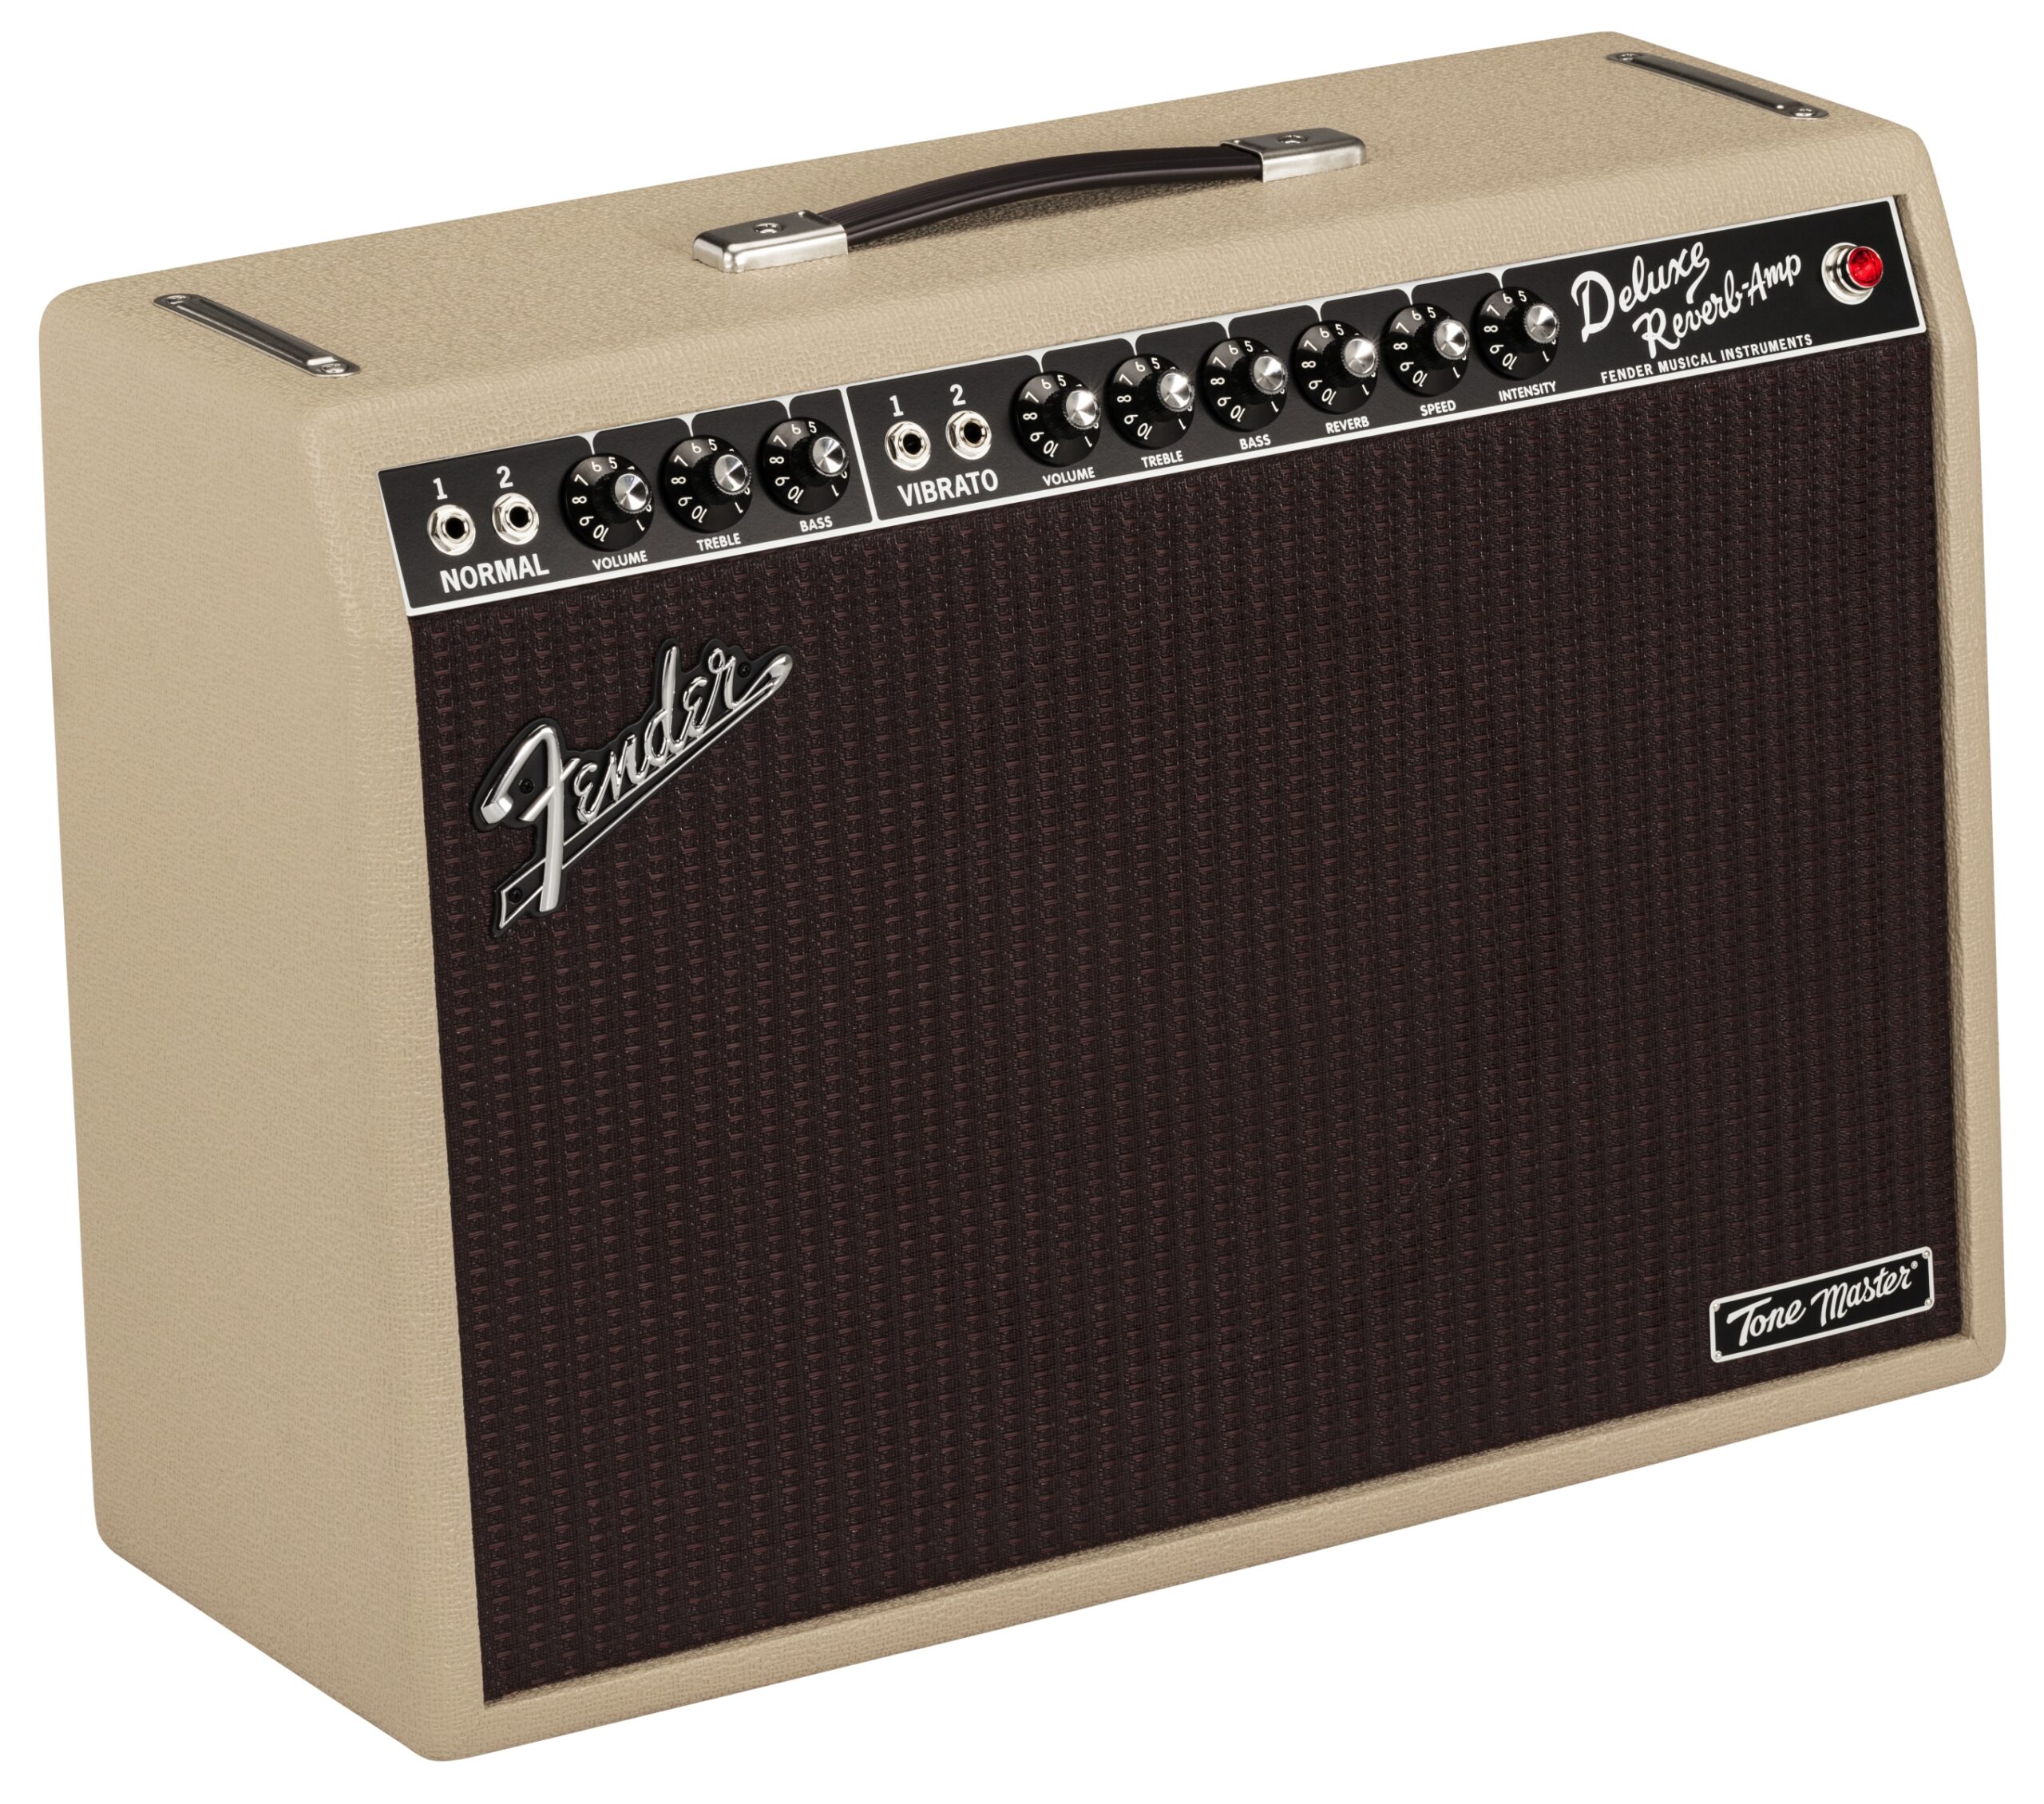 Tone Master Deluxe Reverbsave even more ! - The Guitar Lounge